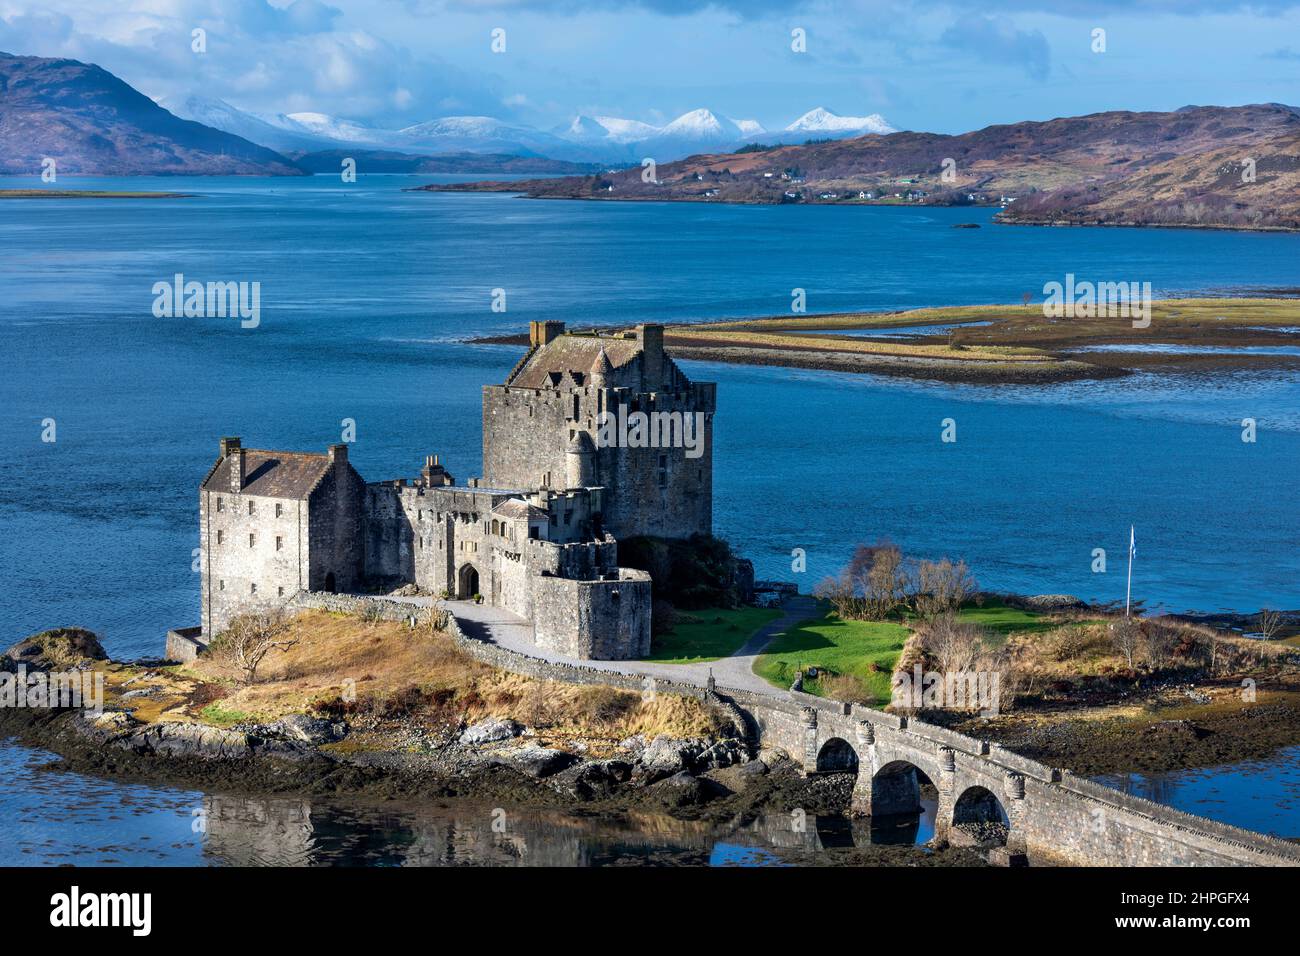 EILEAN DONAN CASTLE LOCH DUICH SCOTLAND BLUE SEA AND A RECENT FALL OF SNOW ON THE HILLS Stock Photo